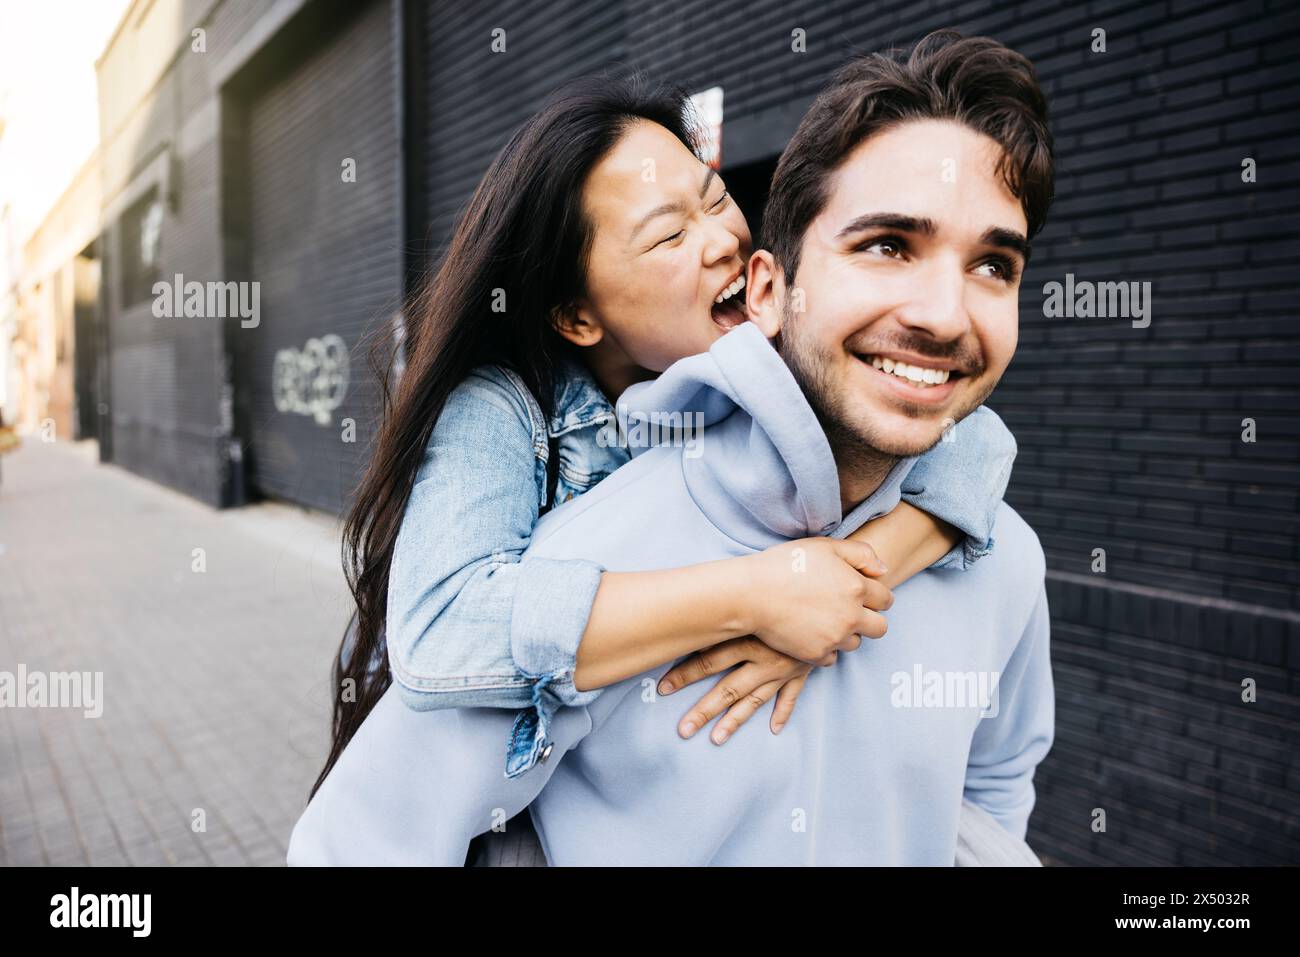 Young man carrying his girlfriend on his back while she tries to bite his ear, walking on the city street. Couple piggybacking on city street. Stock Photo